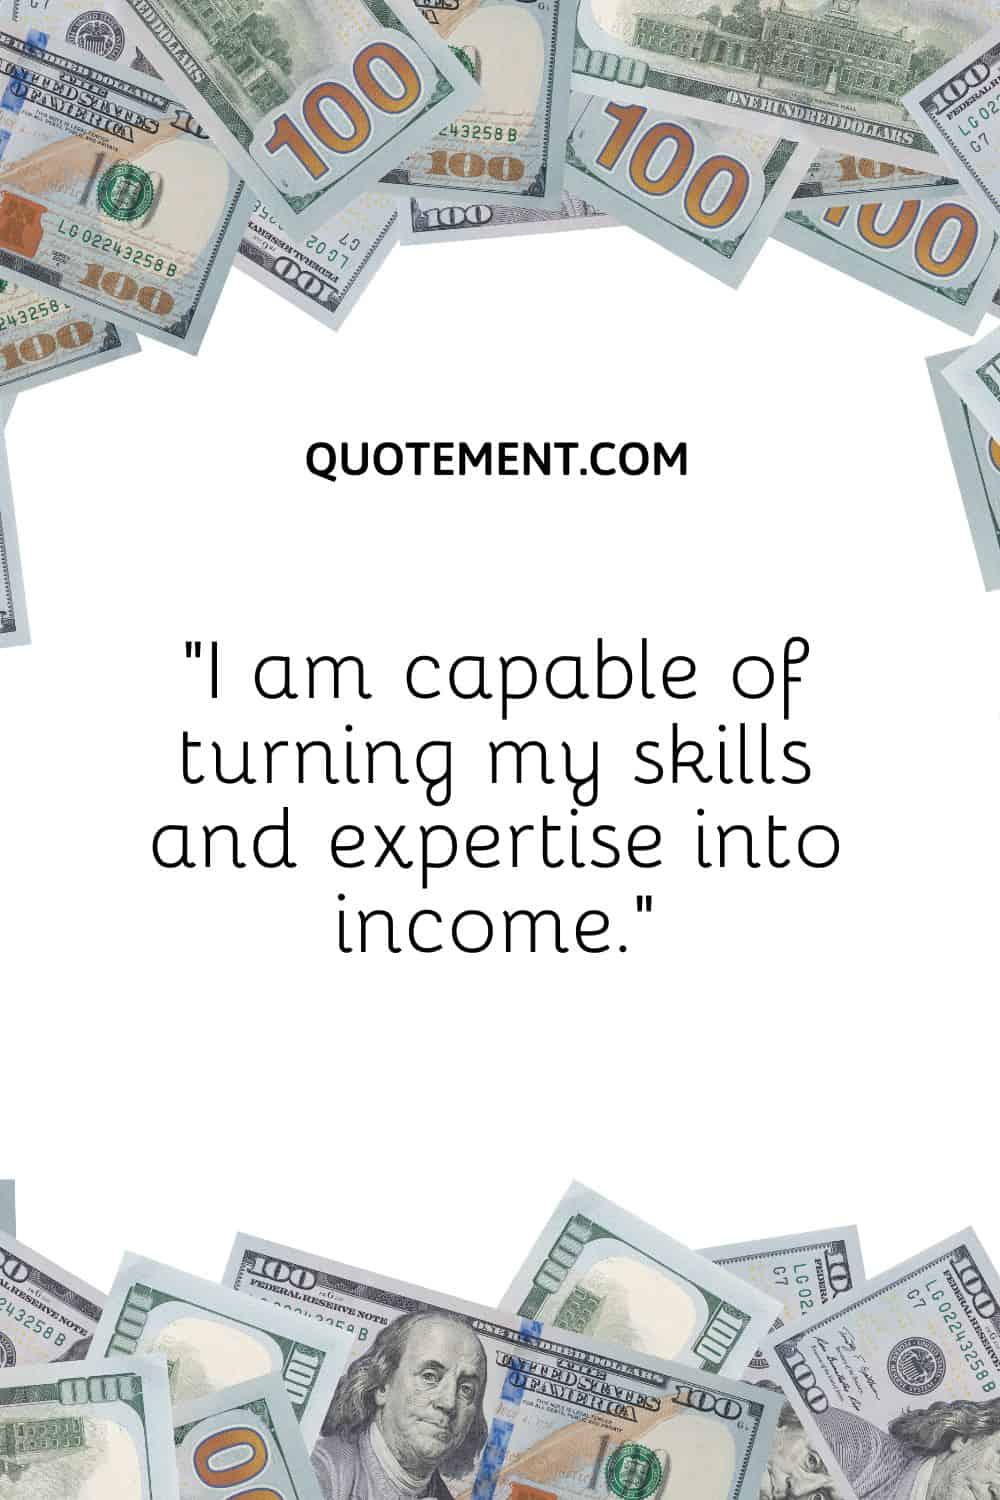 “I am capable of turning my skills and expertise into income.”